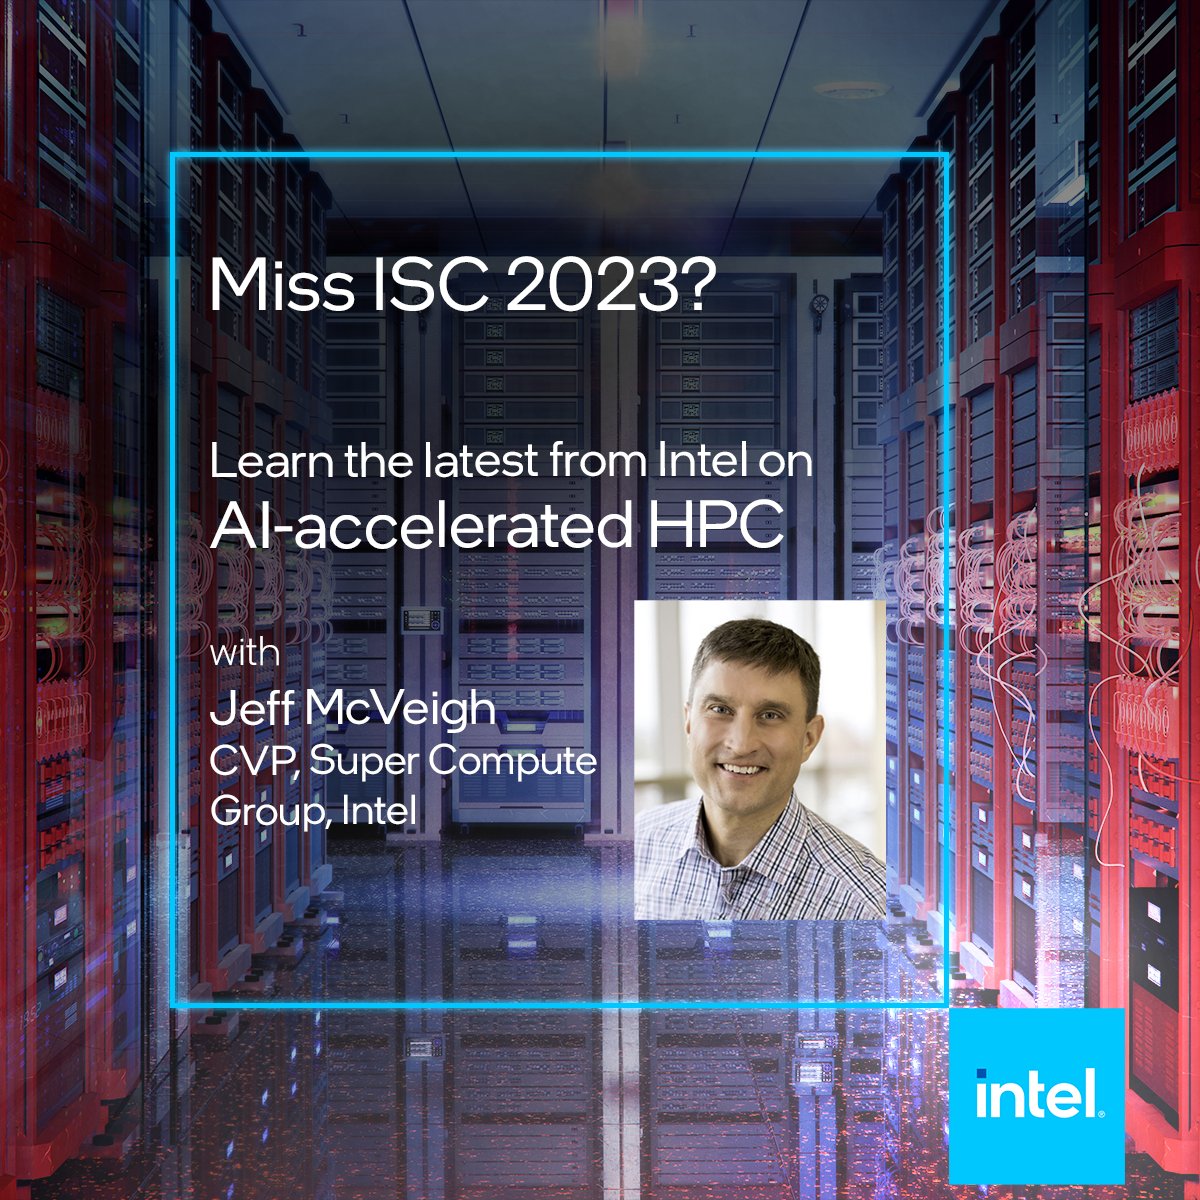 Miss ISC 2023? Learn the latest on “Meeting the Demands of AI-Accelerated HPC” in an exclusive article from #Intel Jeff McVeigh (@CodeNative). ow.ly/mcfz50ONnik #HPC #ISC23